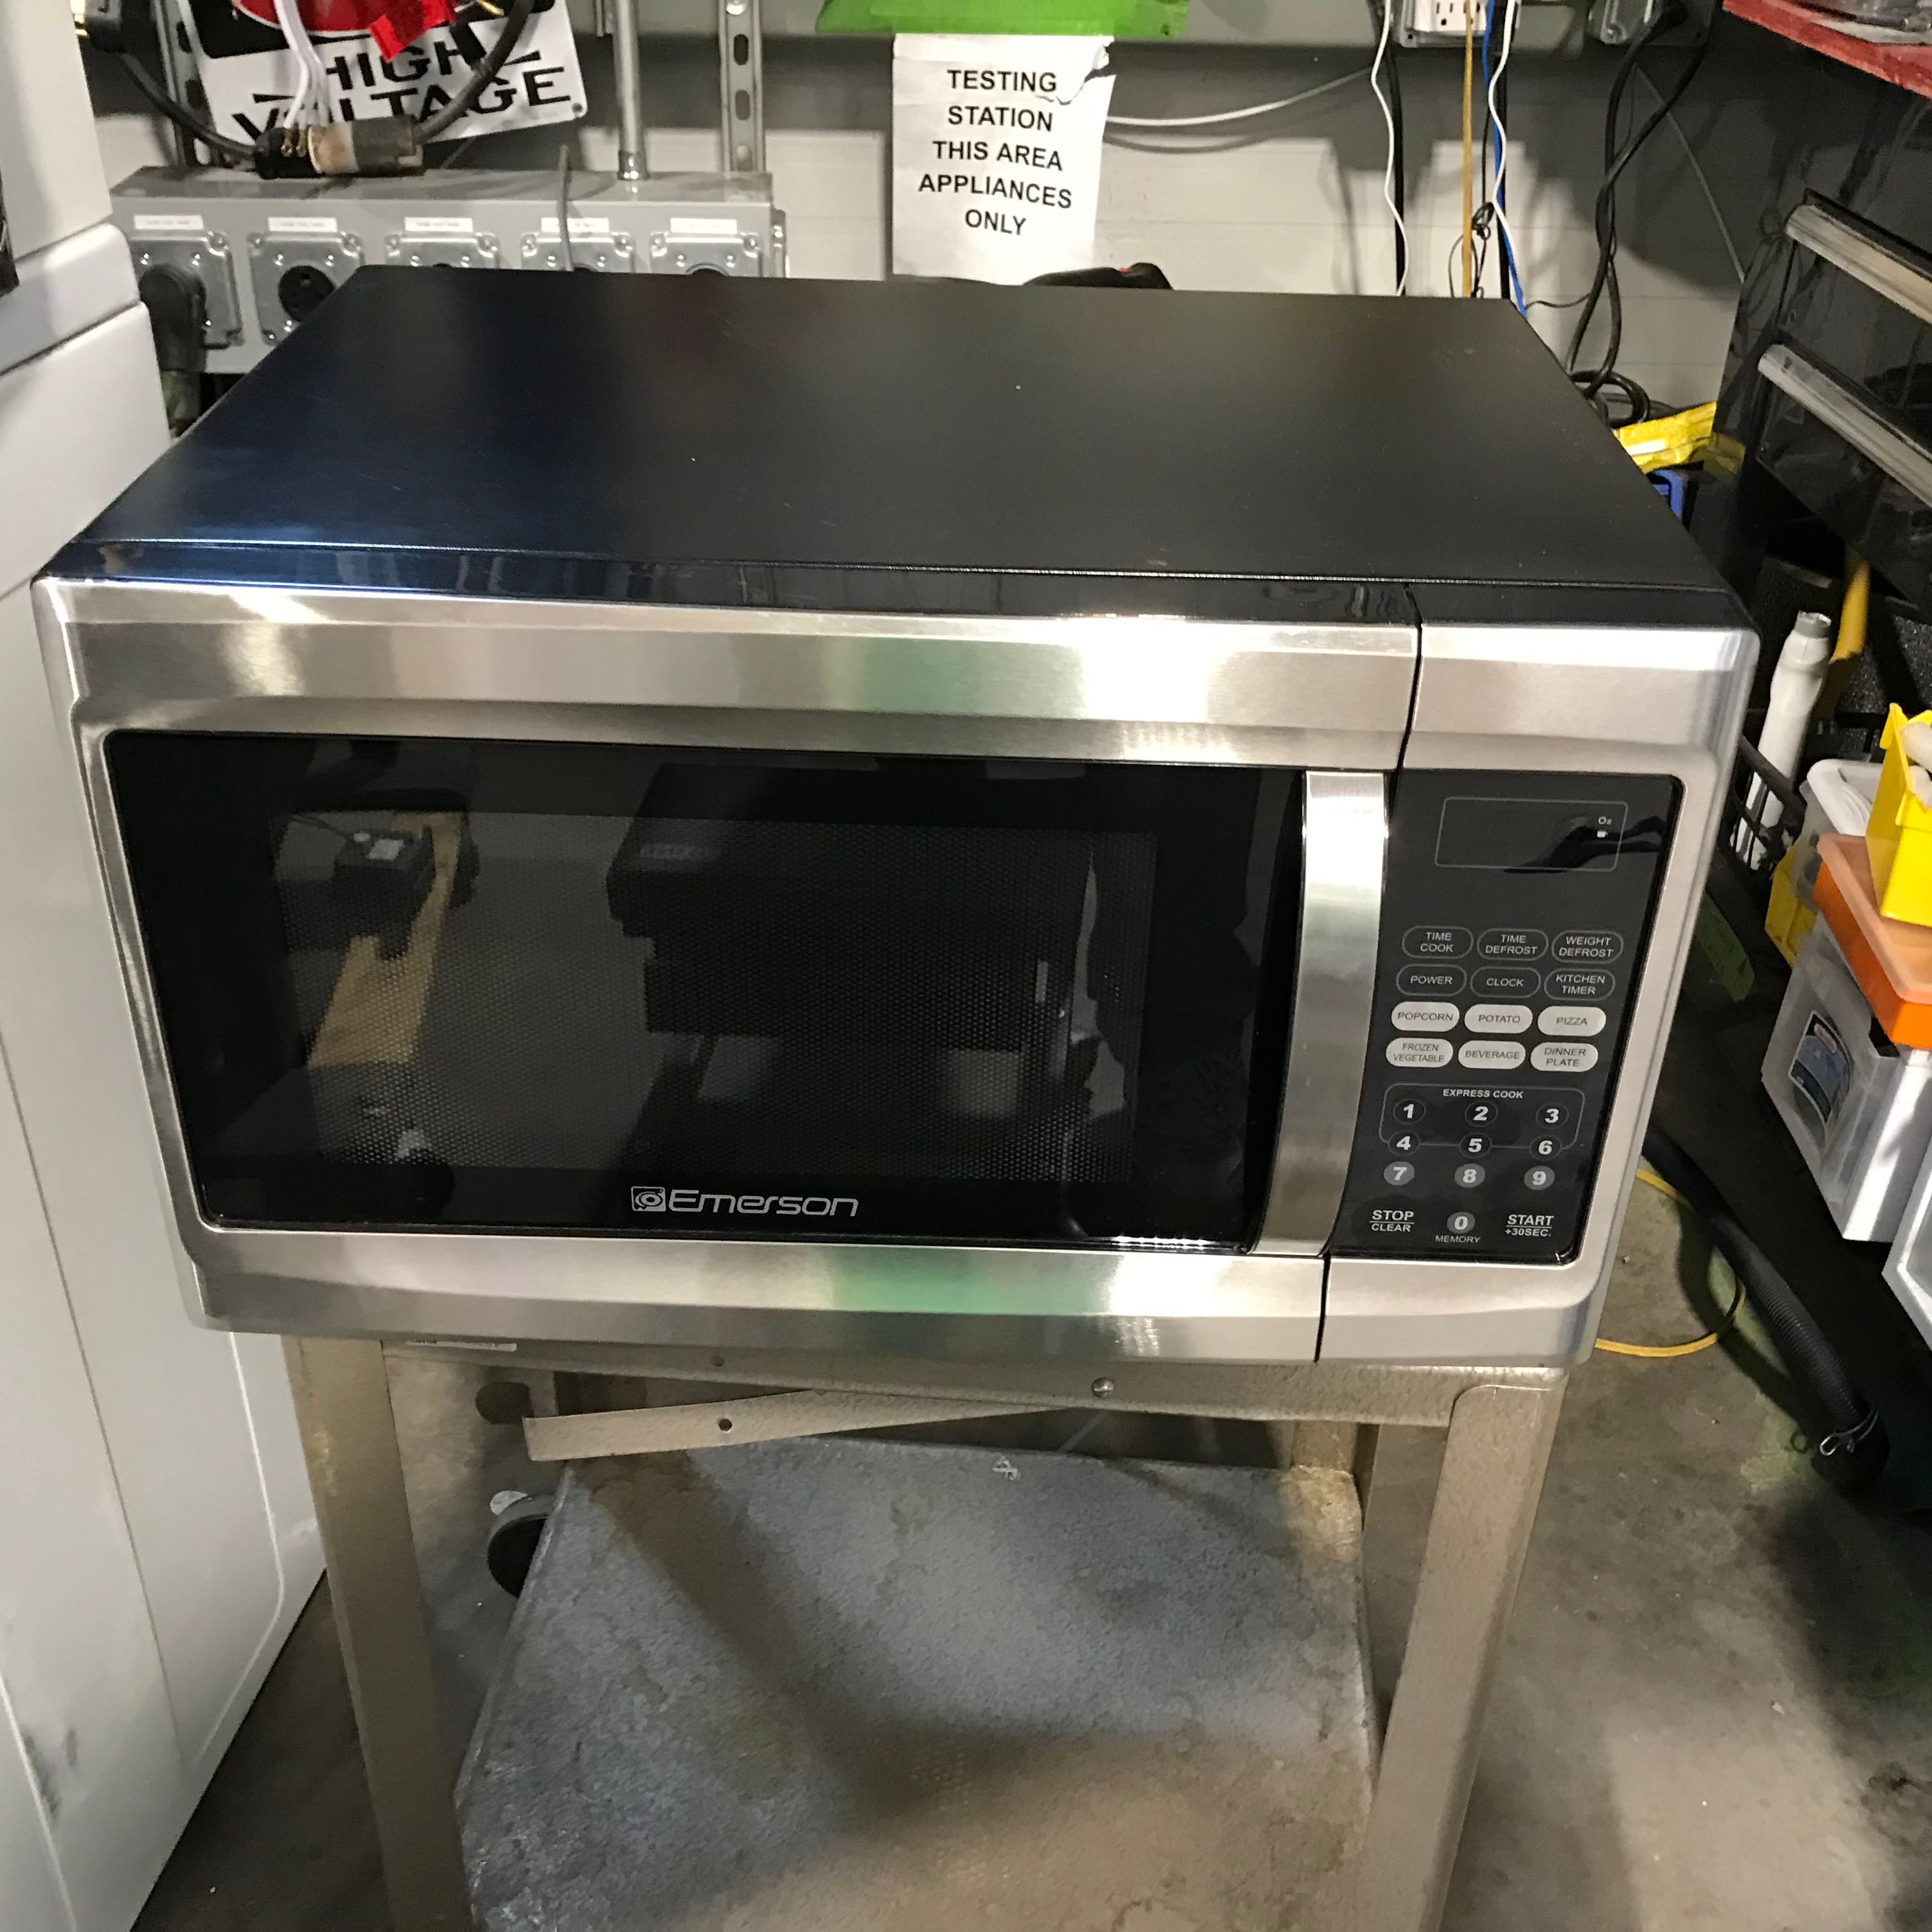 20.5"x 17"x 12" Emerson Stainless Steel 1000 Watts Microwave